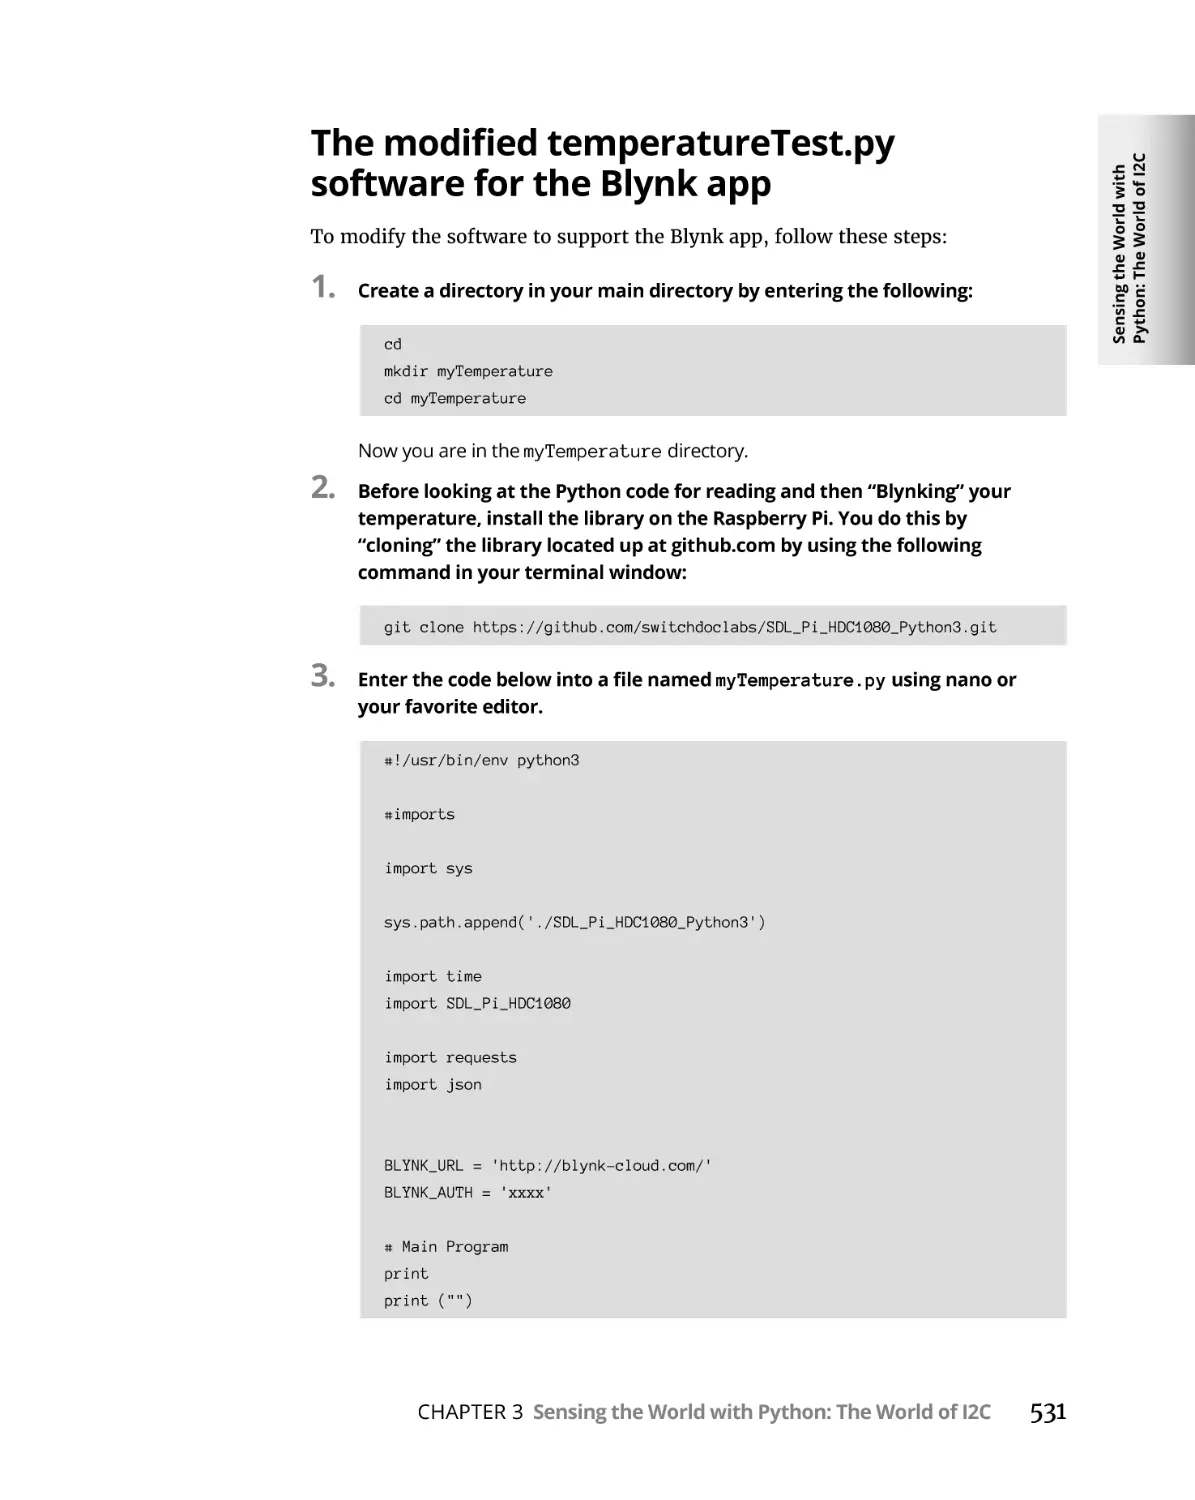 The modified temperatureTest.py software for the Blynk app